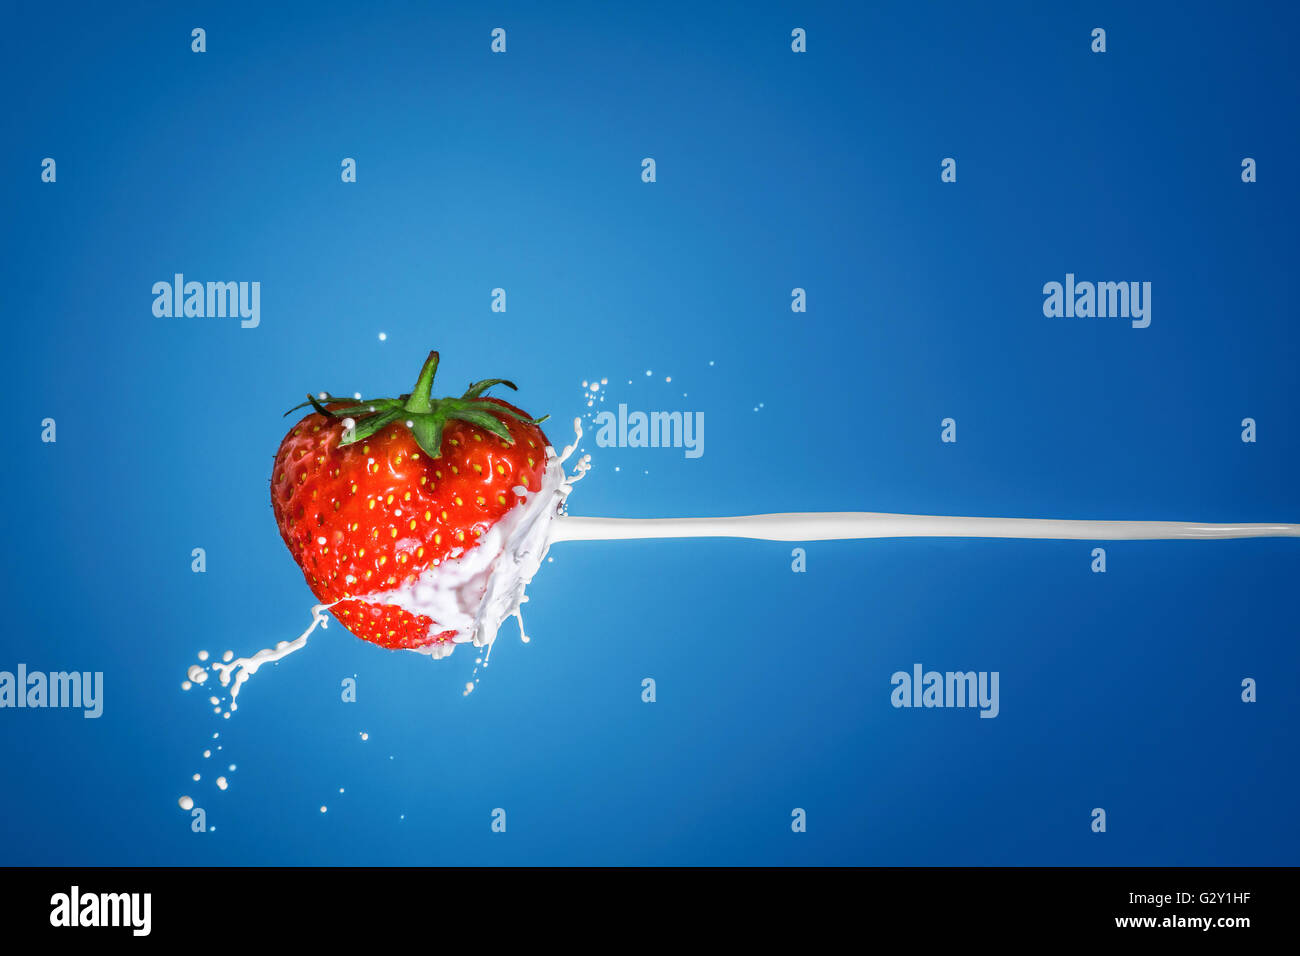 Milk splash with strawberries isolated on a blue background. Stock Photo